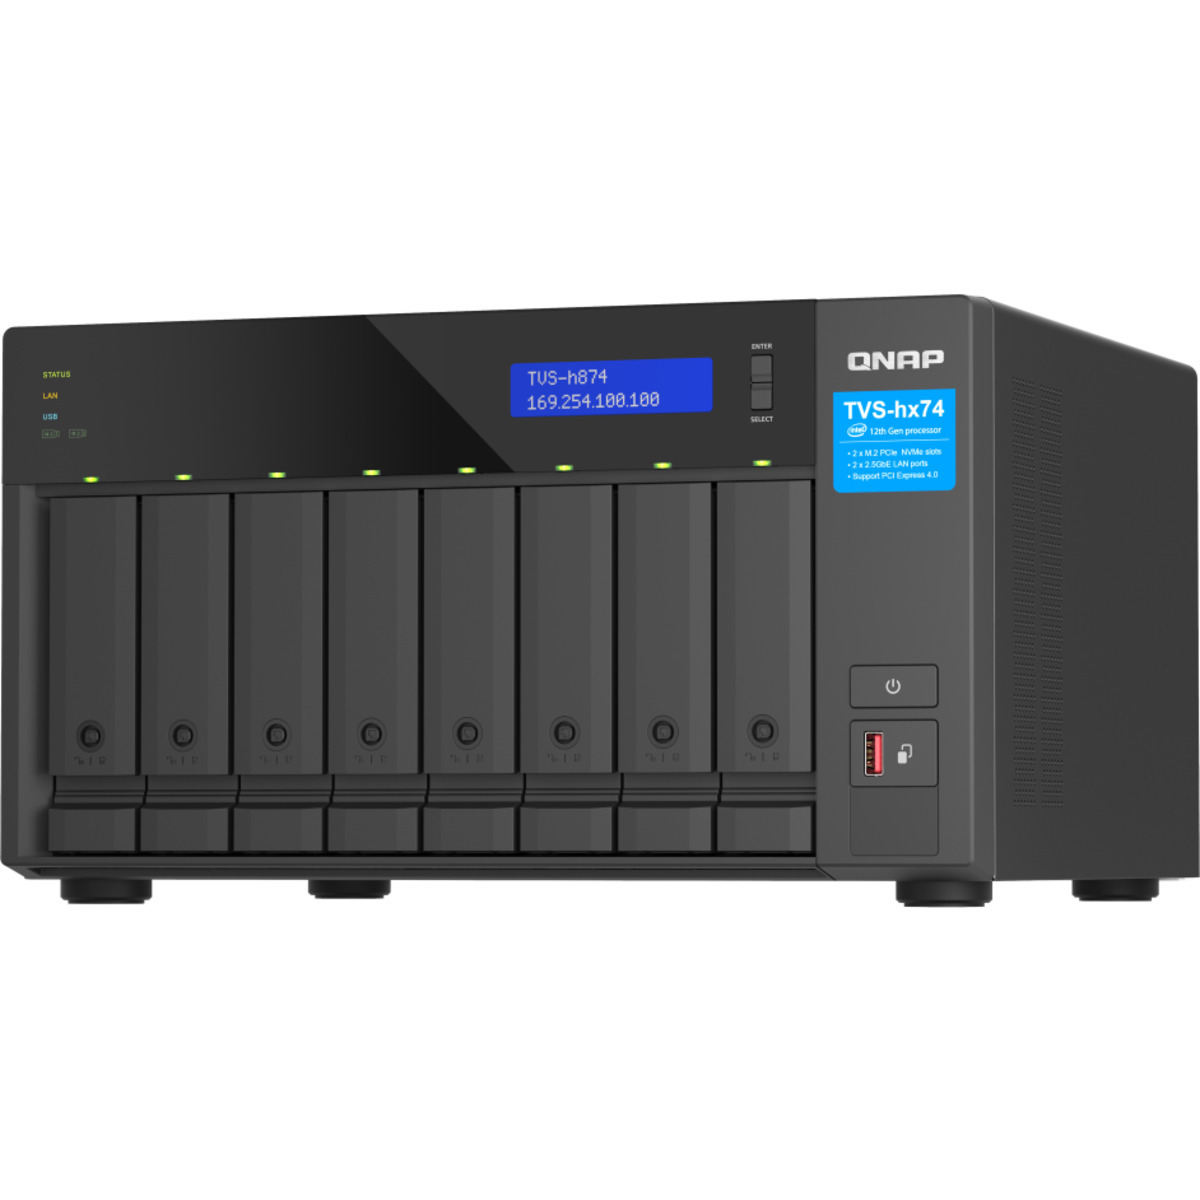 buy QNAP TVS-h874 Core i5 128tb Desktop NAS - Network Attached Storage Device 8x16000gb Seagate EXOS X18 ST16000NM000J 3.5 7200rpm SATA 6Gb/s HDD ENTERPRISE Class Drives Installed - Burn-In Tested - nas headquarters buy network attached storage server device das new raid-5 free shipping usa spring sale TVS-h874 Core i5